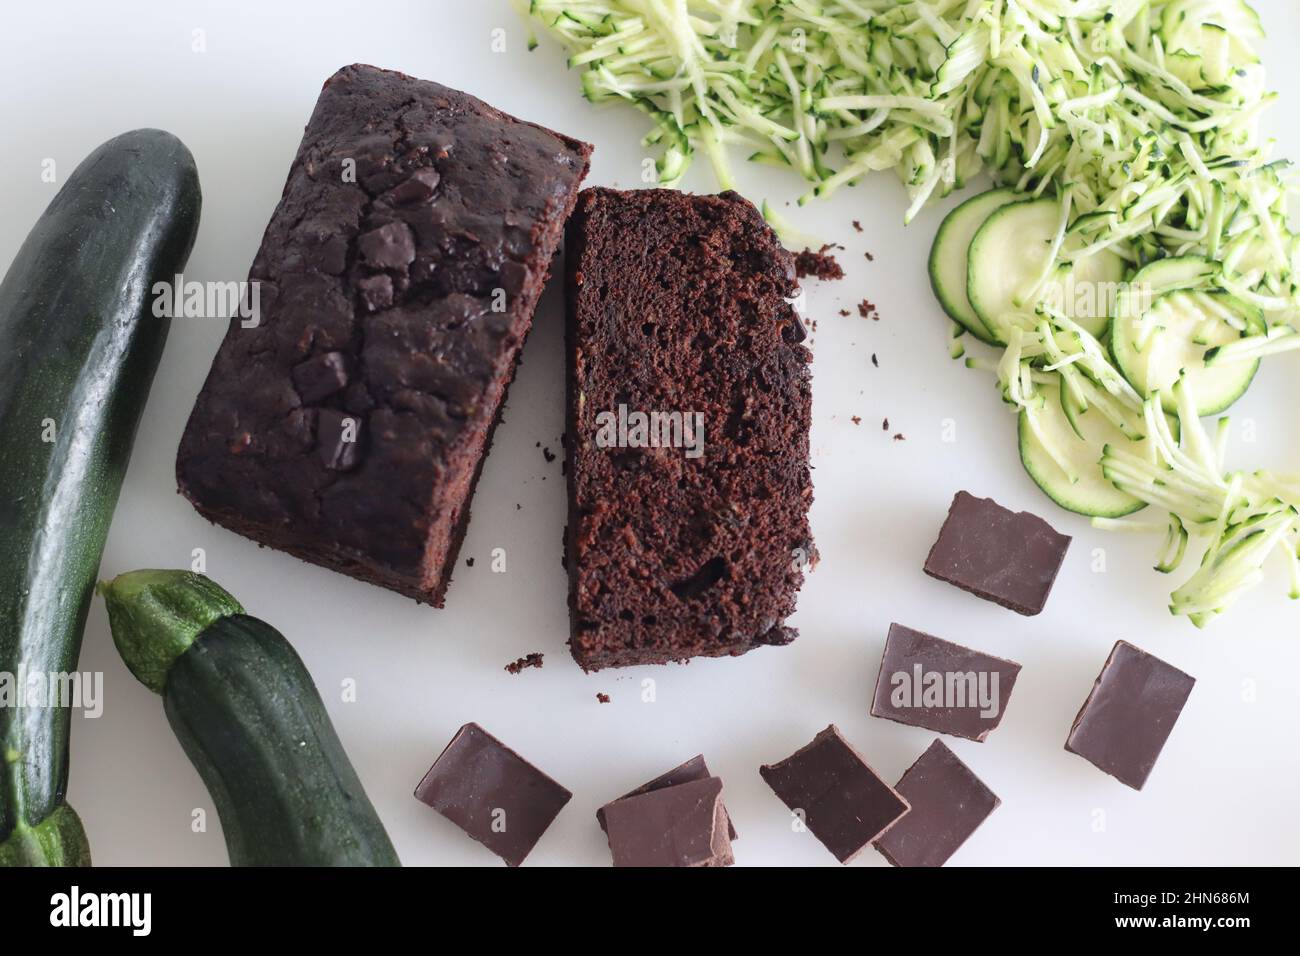 Zucchini chocolate cake slices. Moist double chocolate cake with grated zucchini, coco powder, chocolate and chocolate chips. Shot on white background Stock Photo